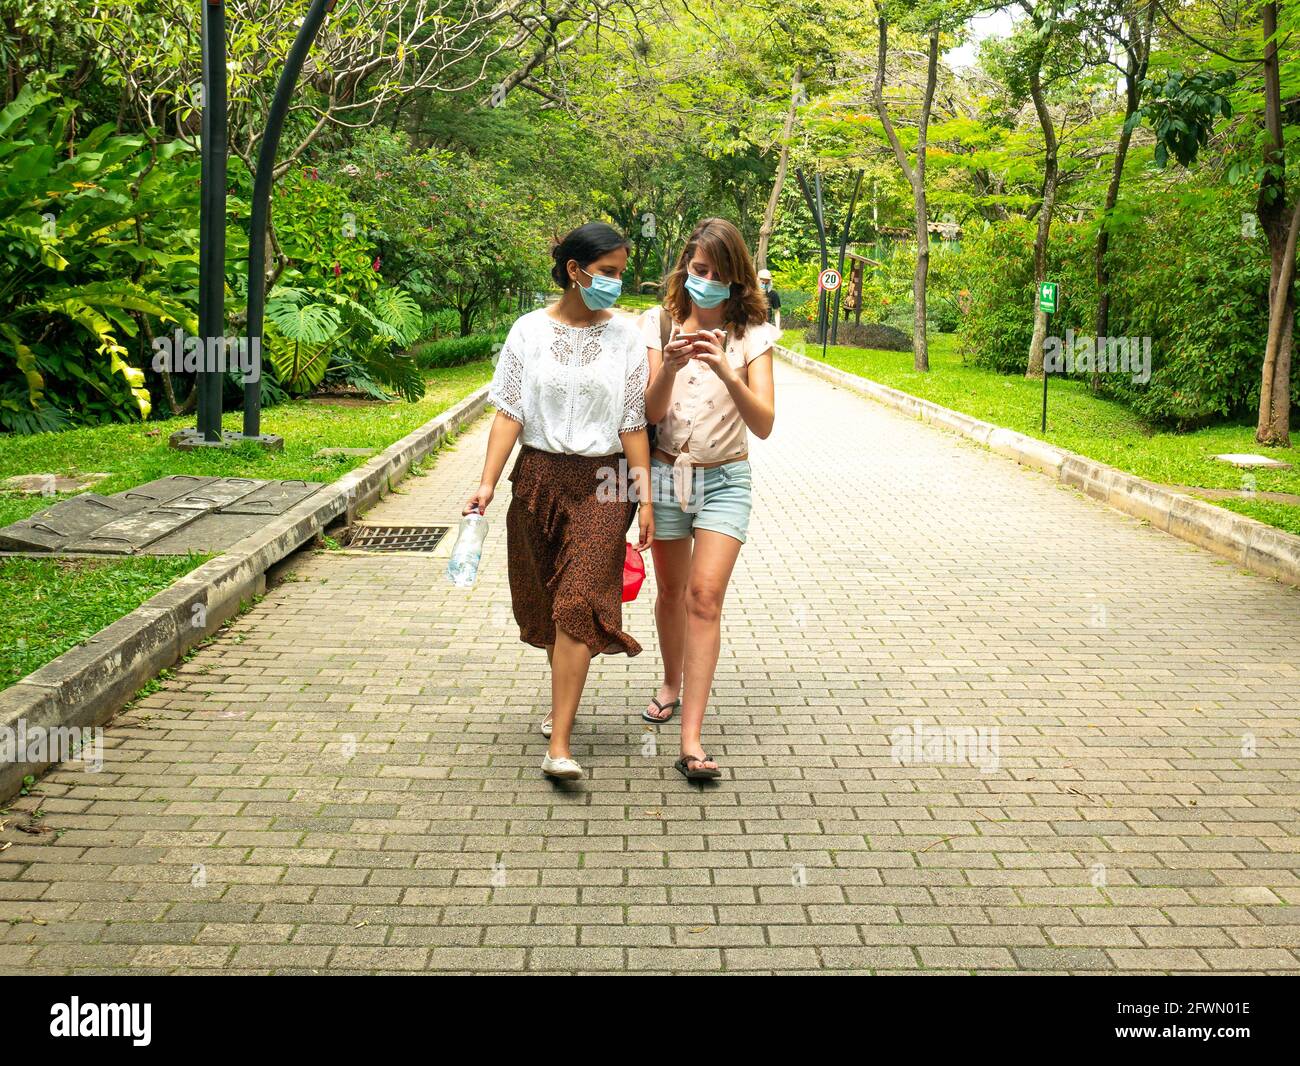 Medellin, Antioquia, Colombia - January 6 2021: Latin and Caucasian Women Wearing a Face Mask are Walking in a Park with a lot of Trees Stock Photo